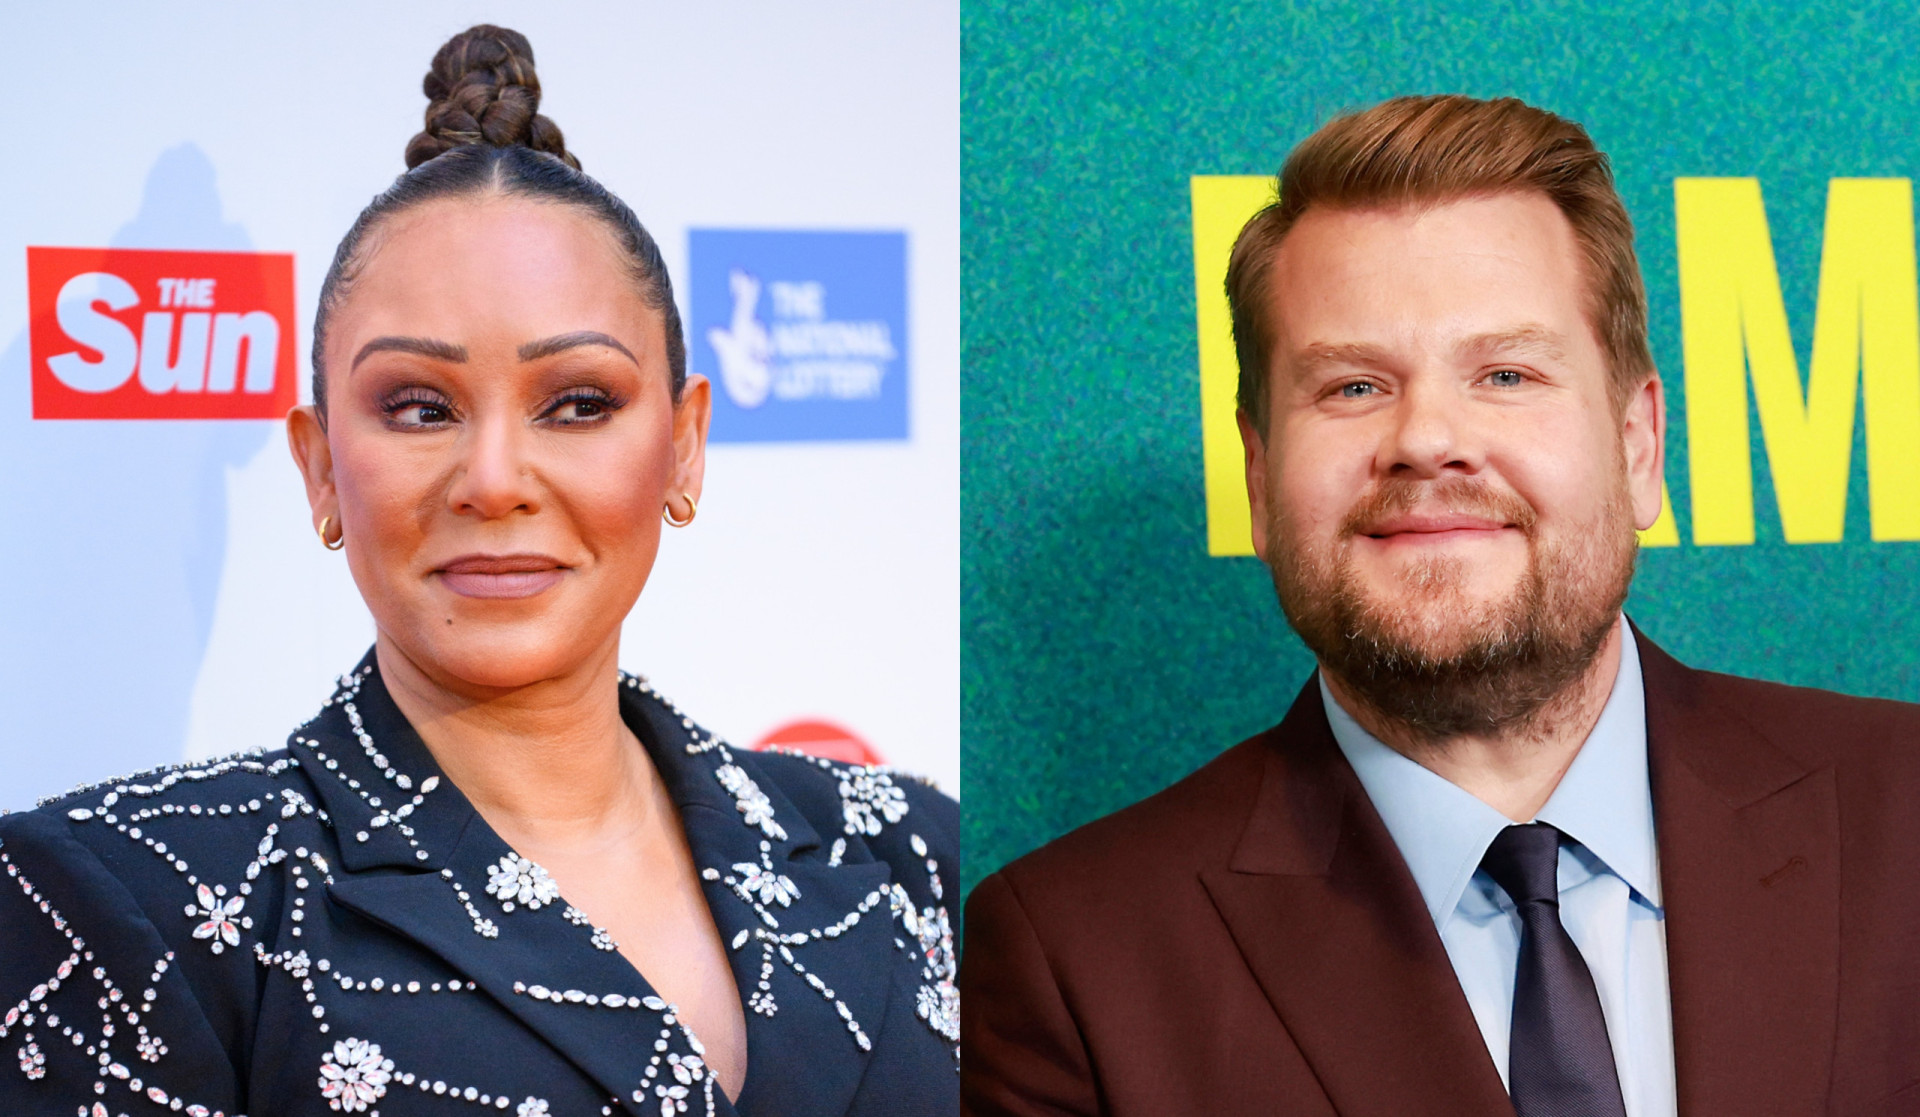 <p>During her appearance on Britain's 'The Big Narstie Show' on December 2, Mel B was direct in naming the "biggest [ ]head" she has ever encountered. According to The Wrap, the former Spice Girl wasted no time mentioning a few names: "James Corden, Geri Halliwell, Jessie J, and me." While she admitted her affection for Halliwell, Mel B also acknowledged that her former bandmate can sometimes be "really annoying." However, her tone changed when discussing 'Late Late Show' host James Corden. “I think you always have to be nice to the people that you work with—whether it be production, camera guys, sound, lighting,” she explained. “We all work for the same thing, so you should always be nice, and he hasn’t been very nice.”  Earlier in 2022, he was accused of being rude to staff at NYC's Balthazar restaurant. Mel B herself has appeared on Corden's show in both 2016 and 2018.</p><p><a href="https://www.msn.com/en-us/community/channel/vid-7xx8mnucu55yw63we9va2gwr7uihbxwc68fxqp25x6tg4ftibpra?cvid=94631541bc0f4f89bfd59158d696ad7e">Follow us and access great exclusive content every day</a></p>